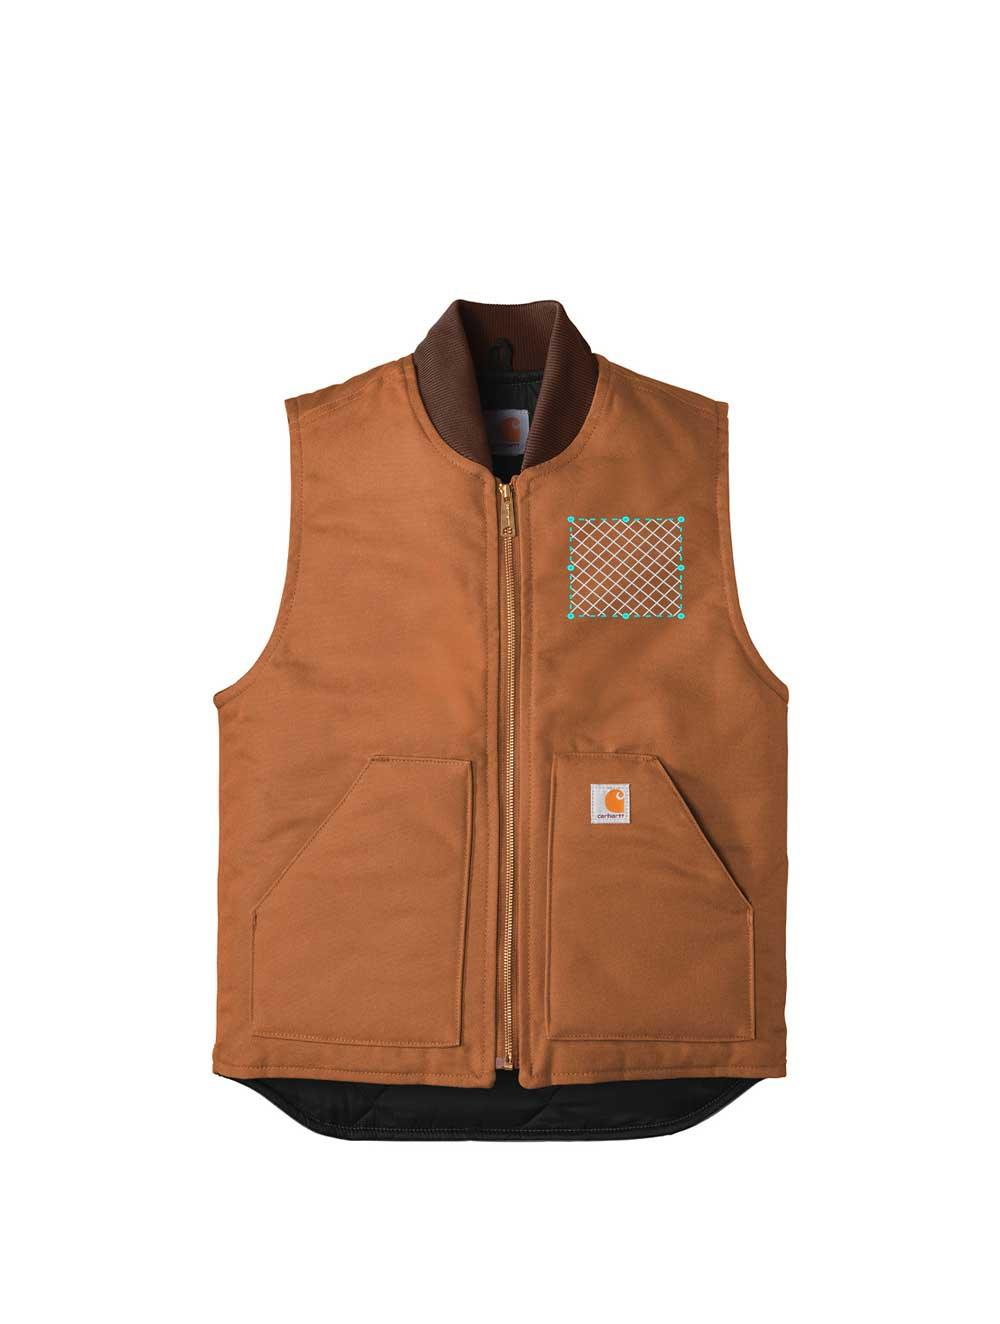 Embroidered Carhartt ® Duck Vest - Constantly Create Shop